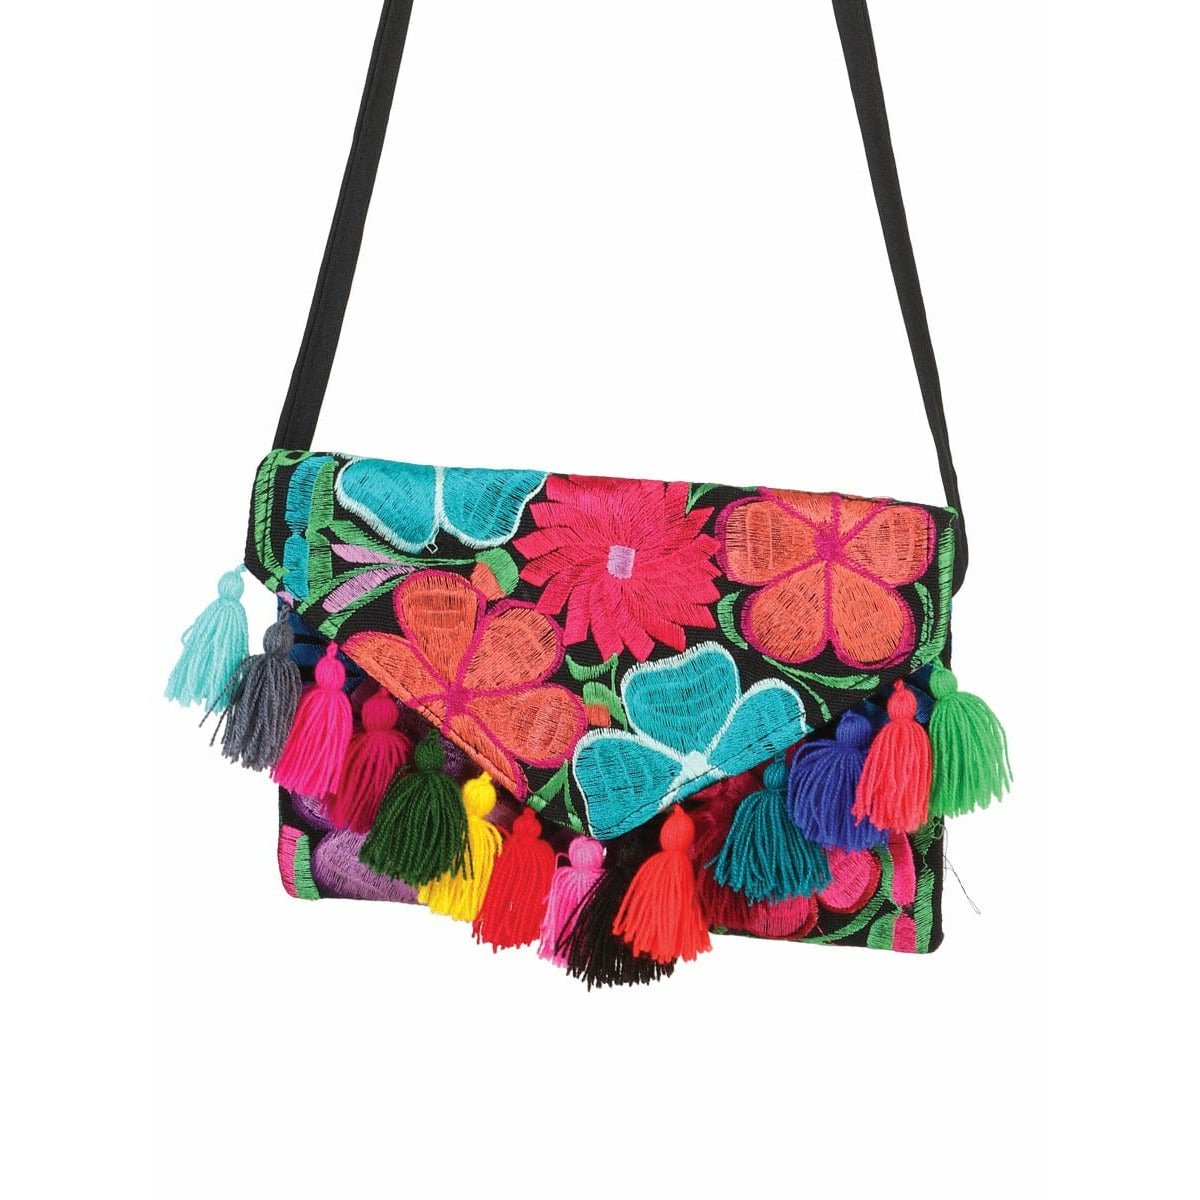 Hand made Mexican suede embroidered bag - CharroAzteca.com